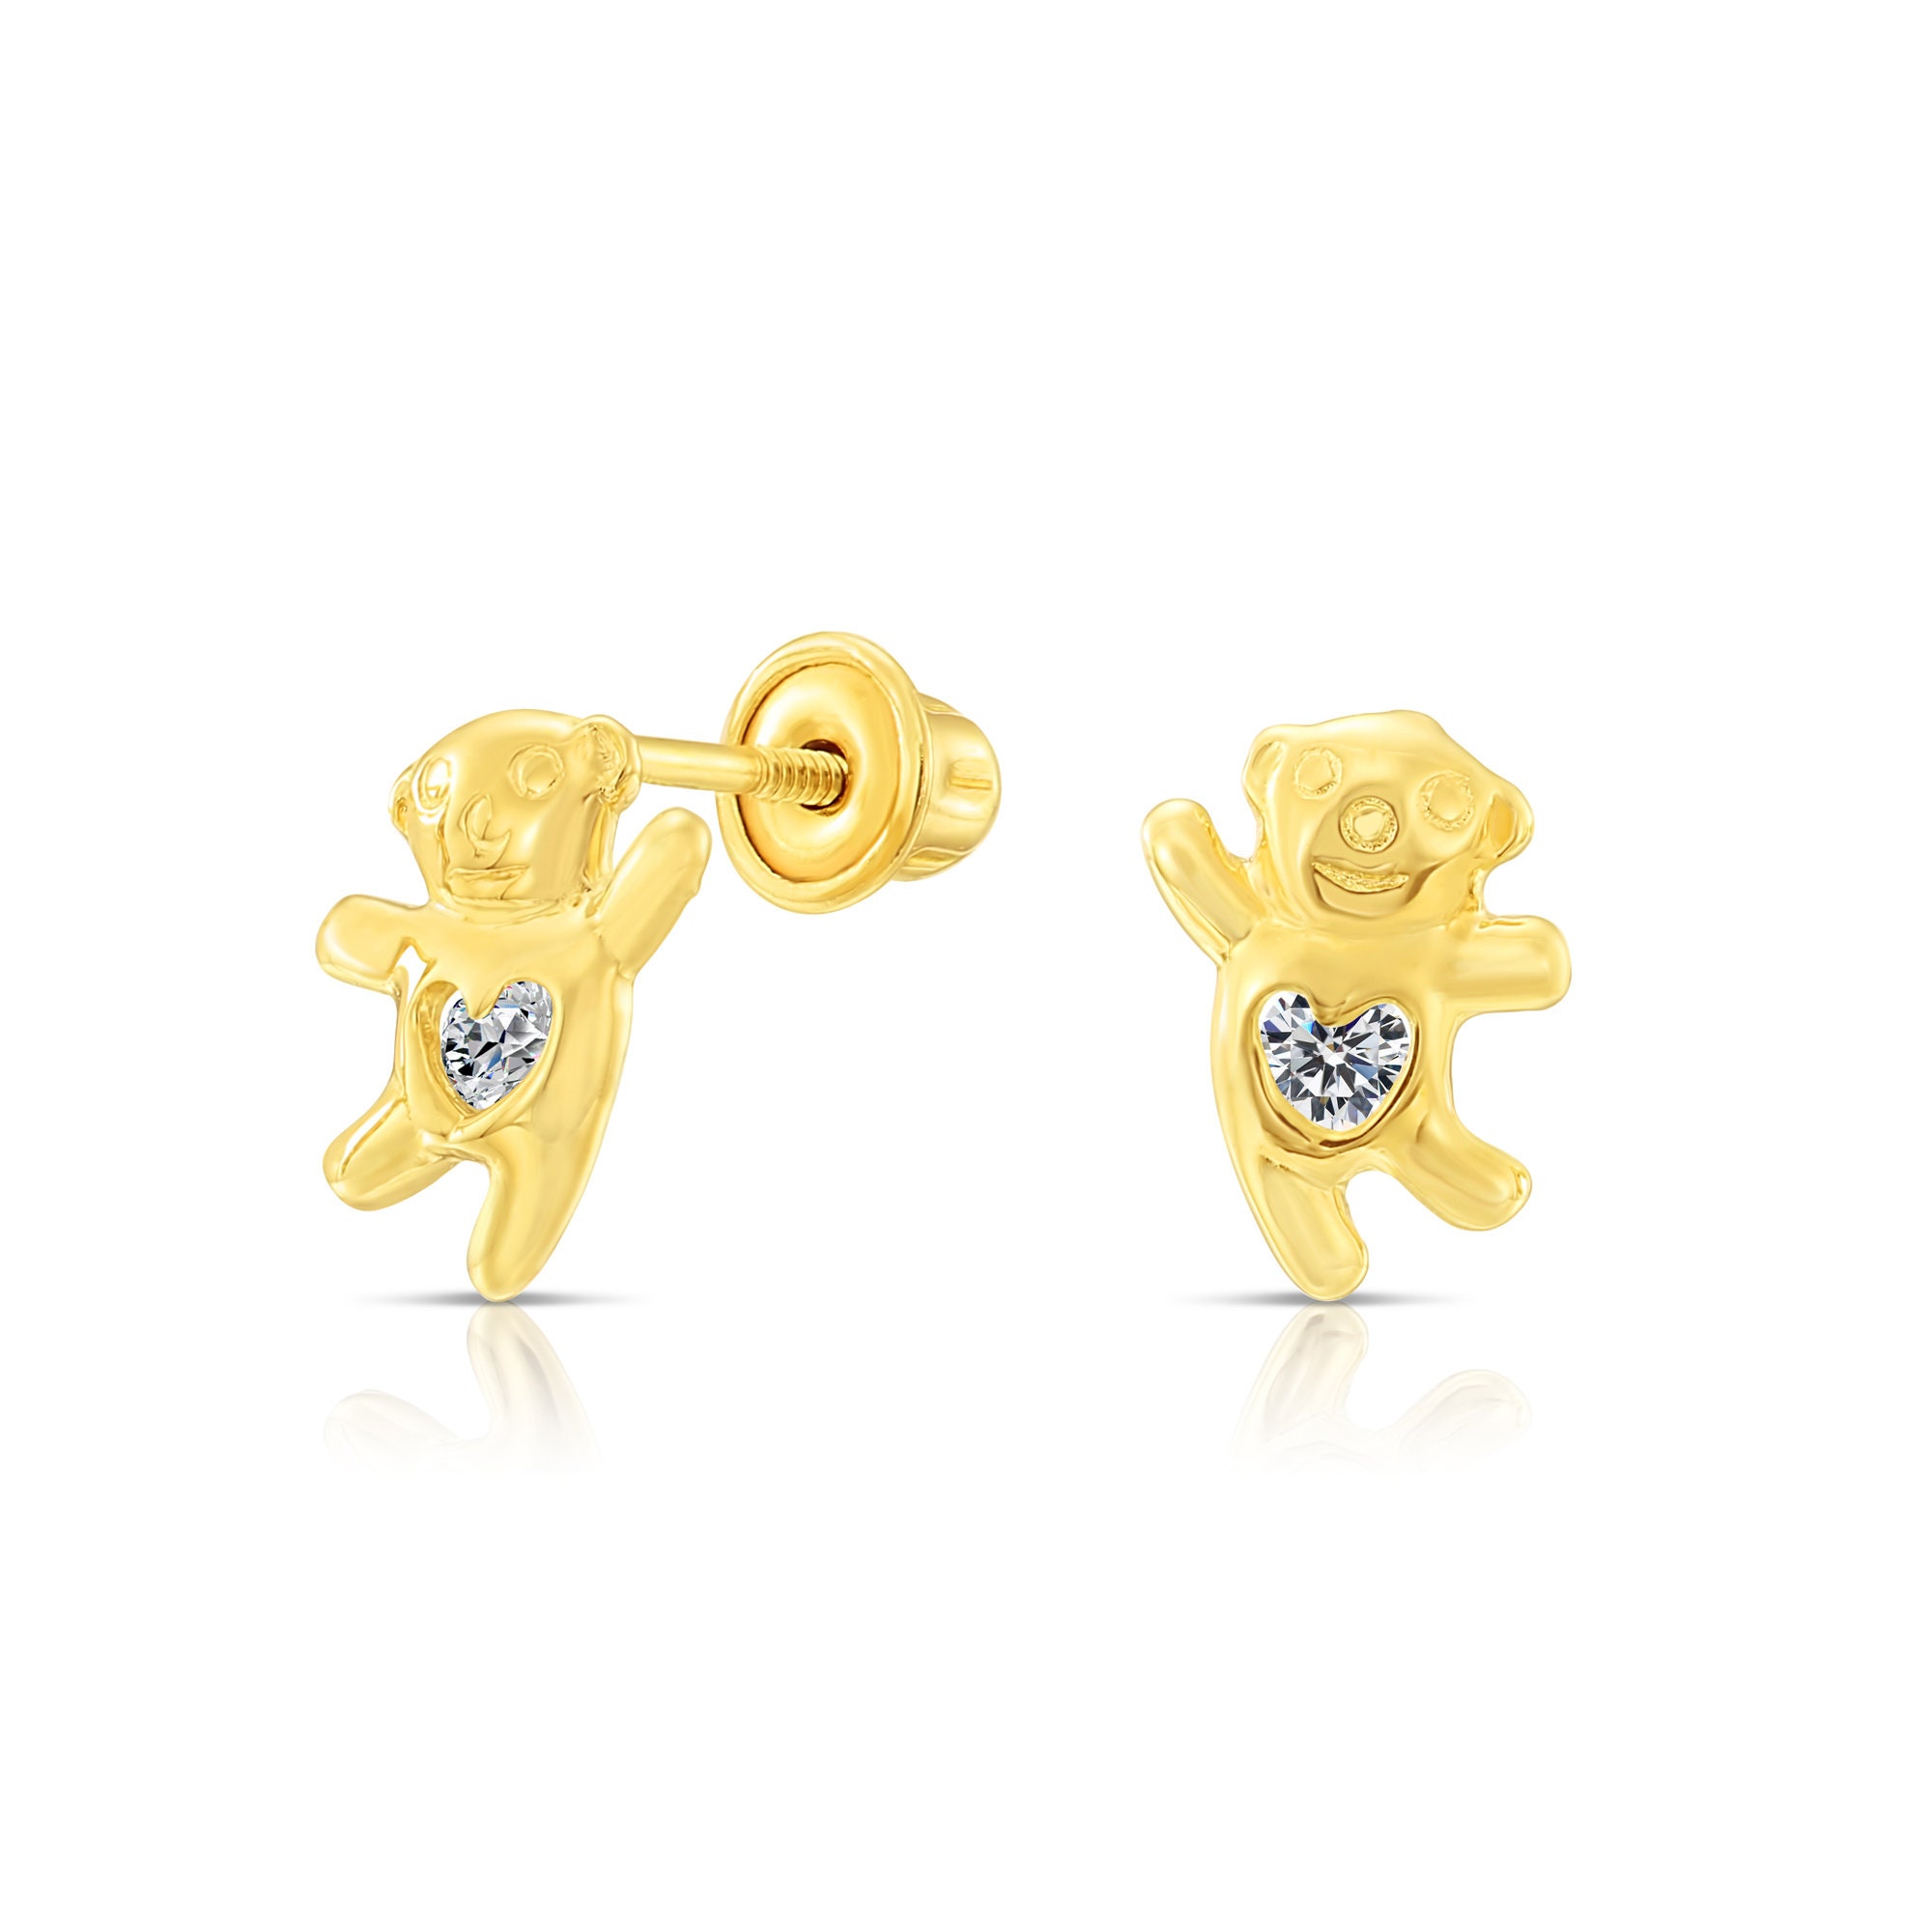 10k Yellow Gold Tiny Cute Dancing Bear Stud Earrings With | Etsy